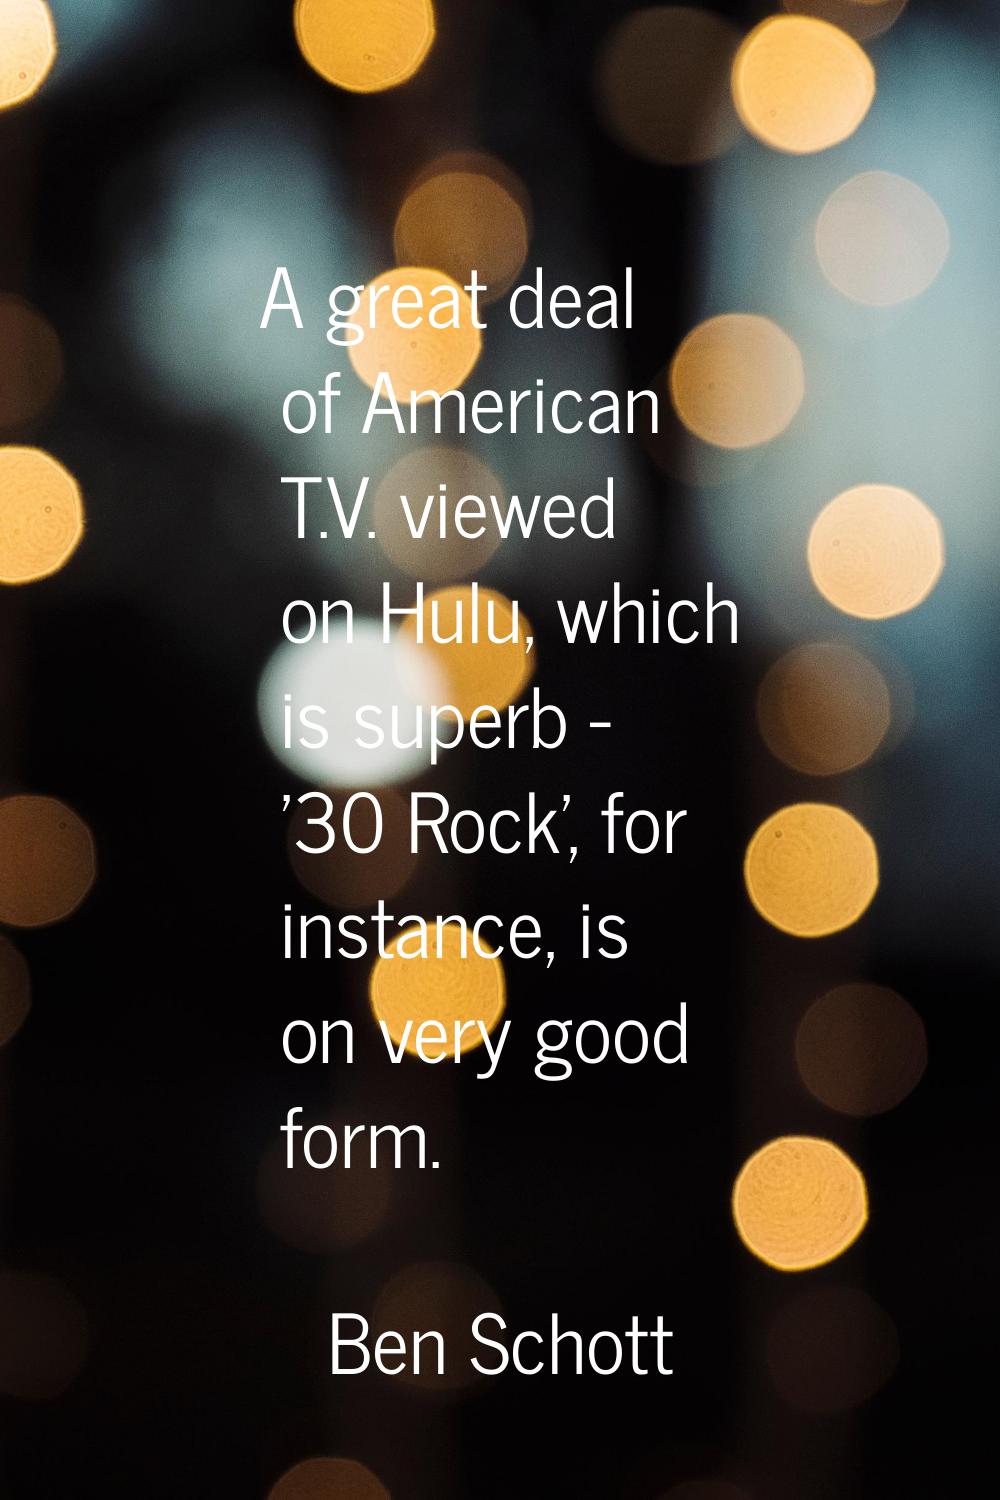 A great deal of American T.V. viewed on Hulu, which is superb - '30 Rock', for instance, is on very